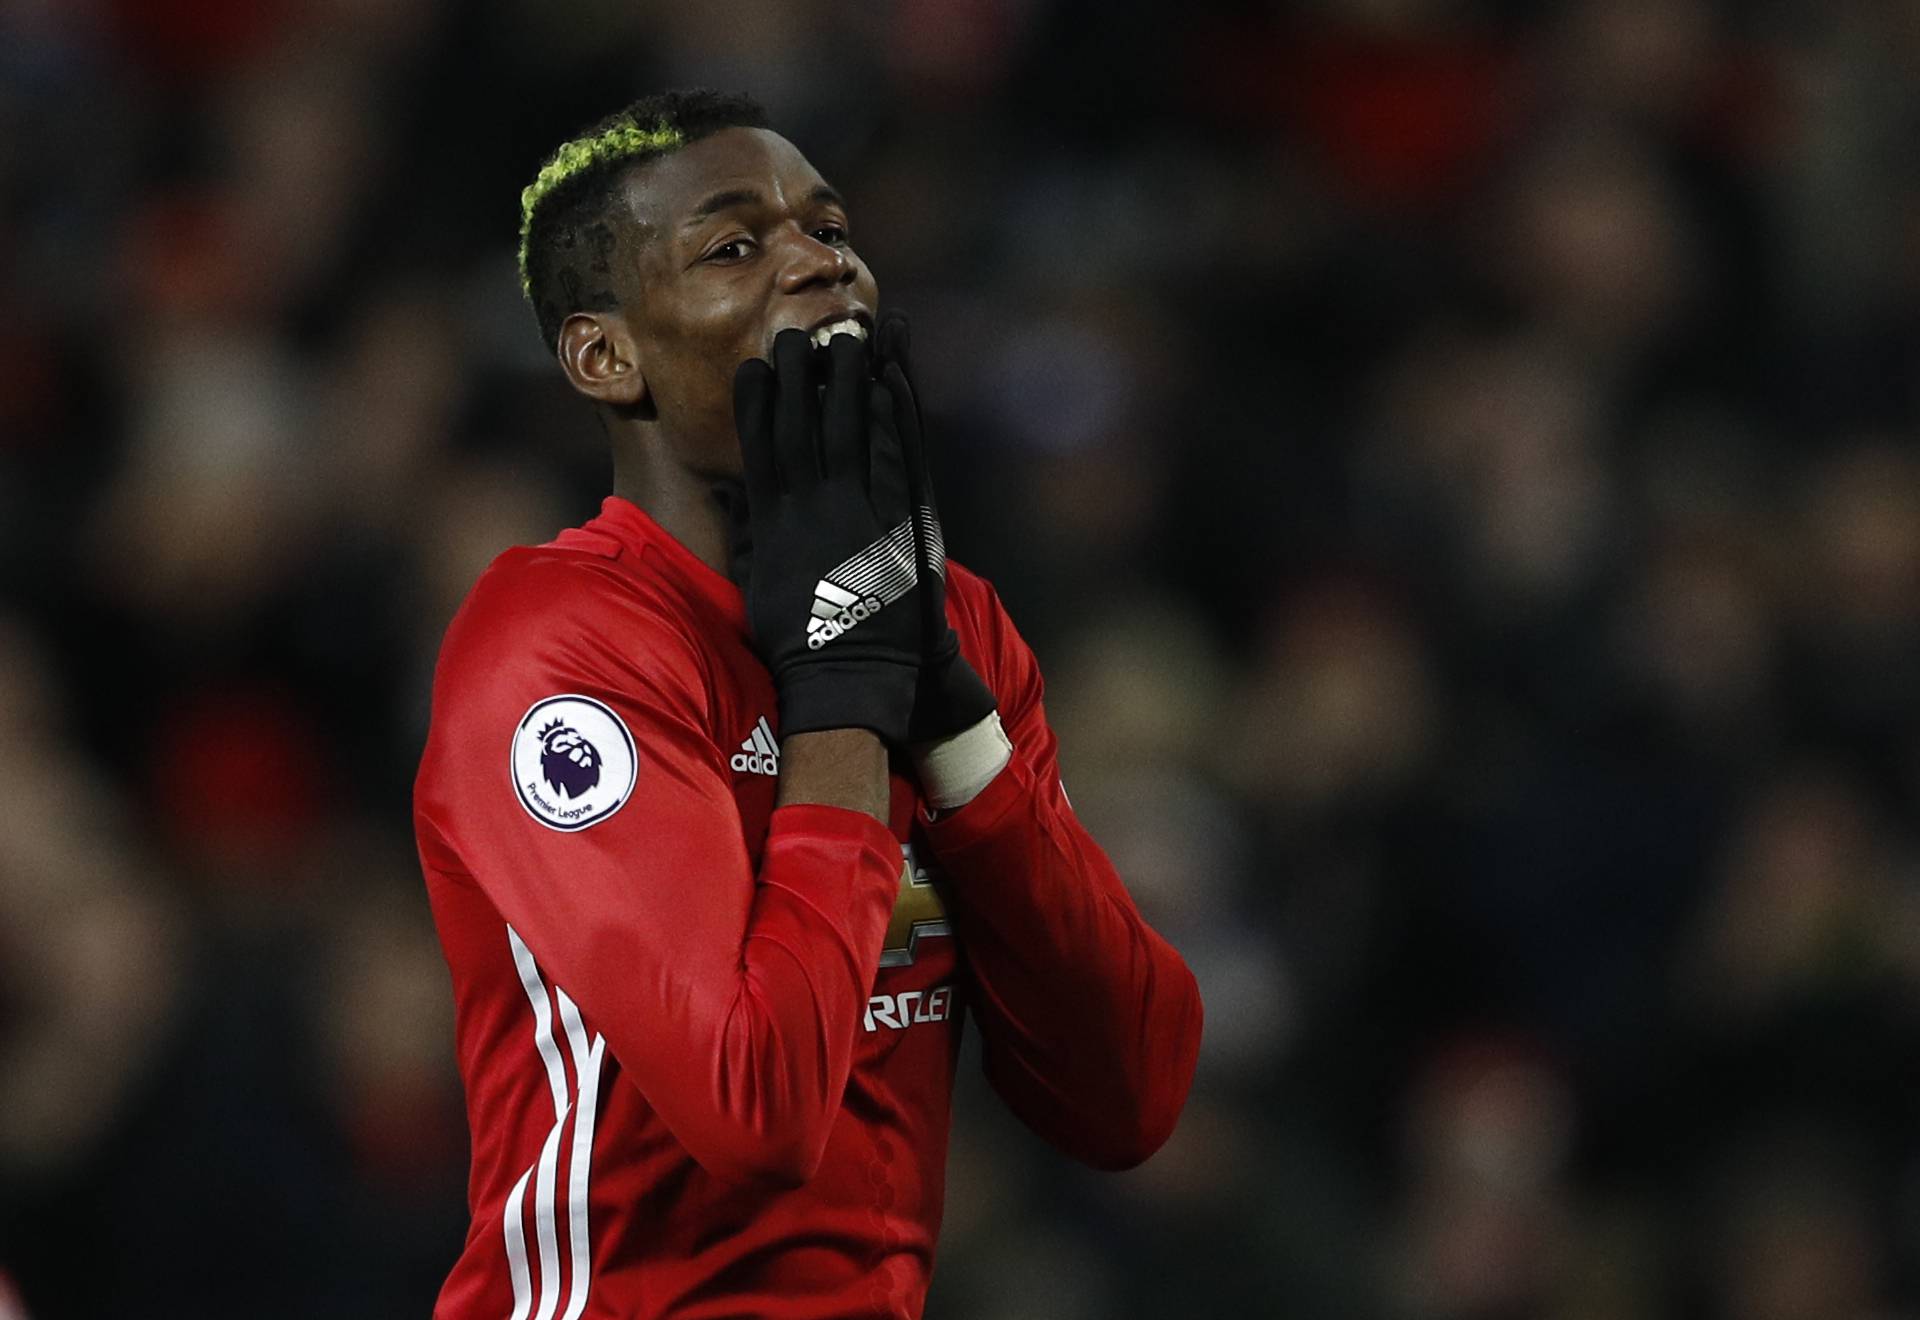 Manchester United's Paul Pogba reacts after a missed chance